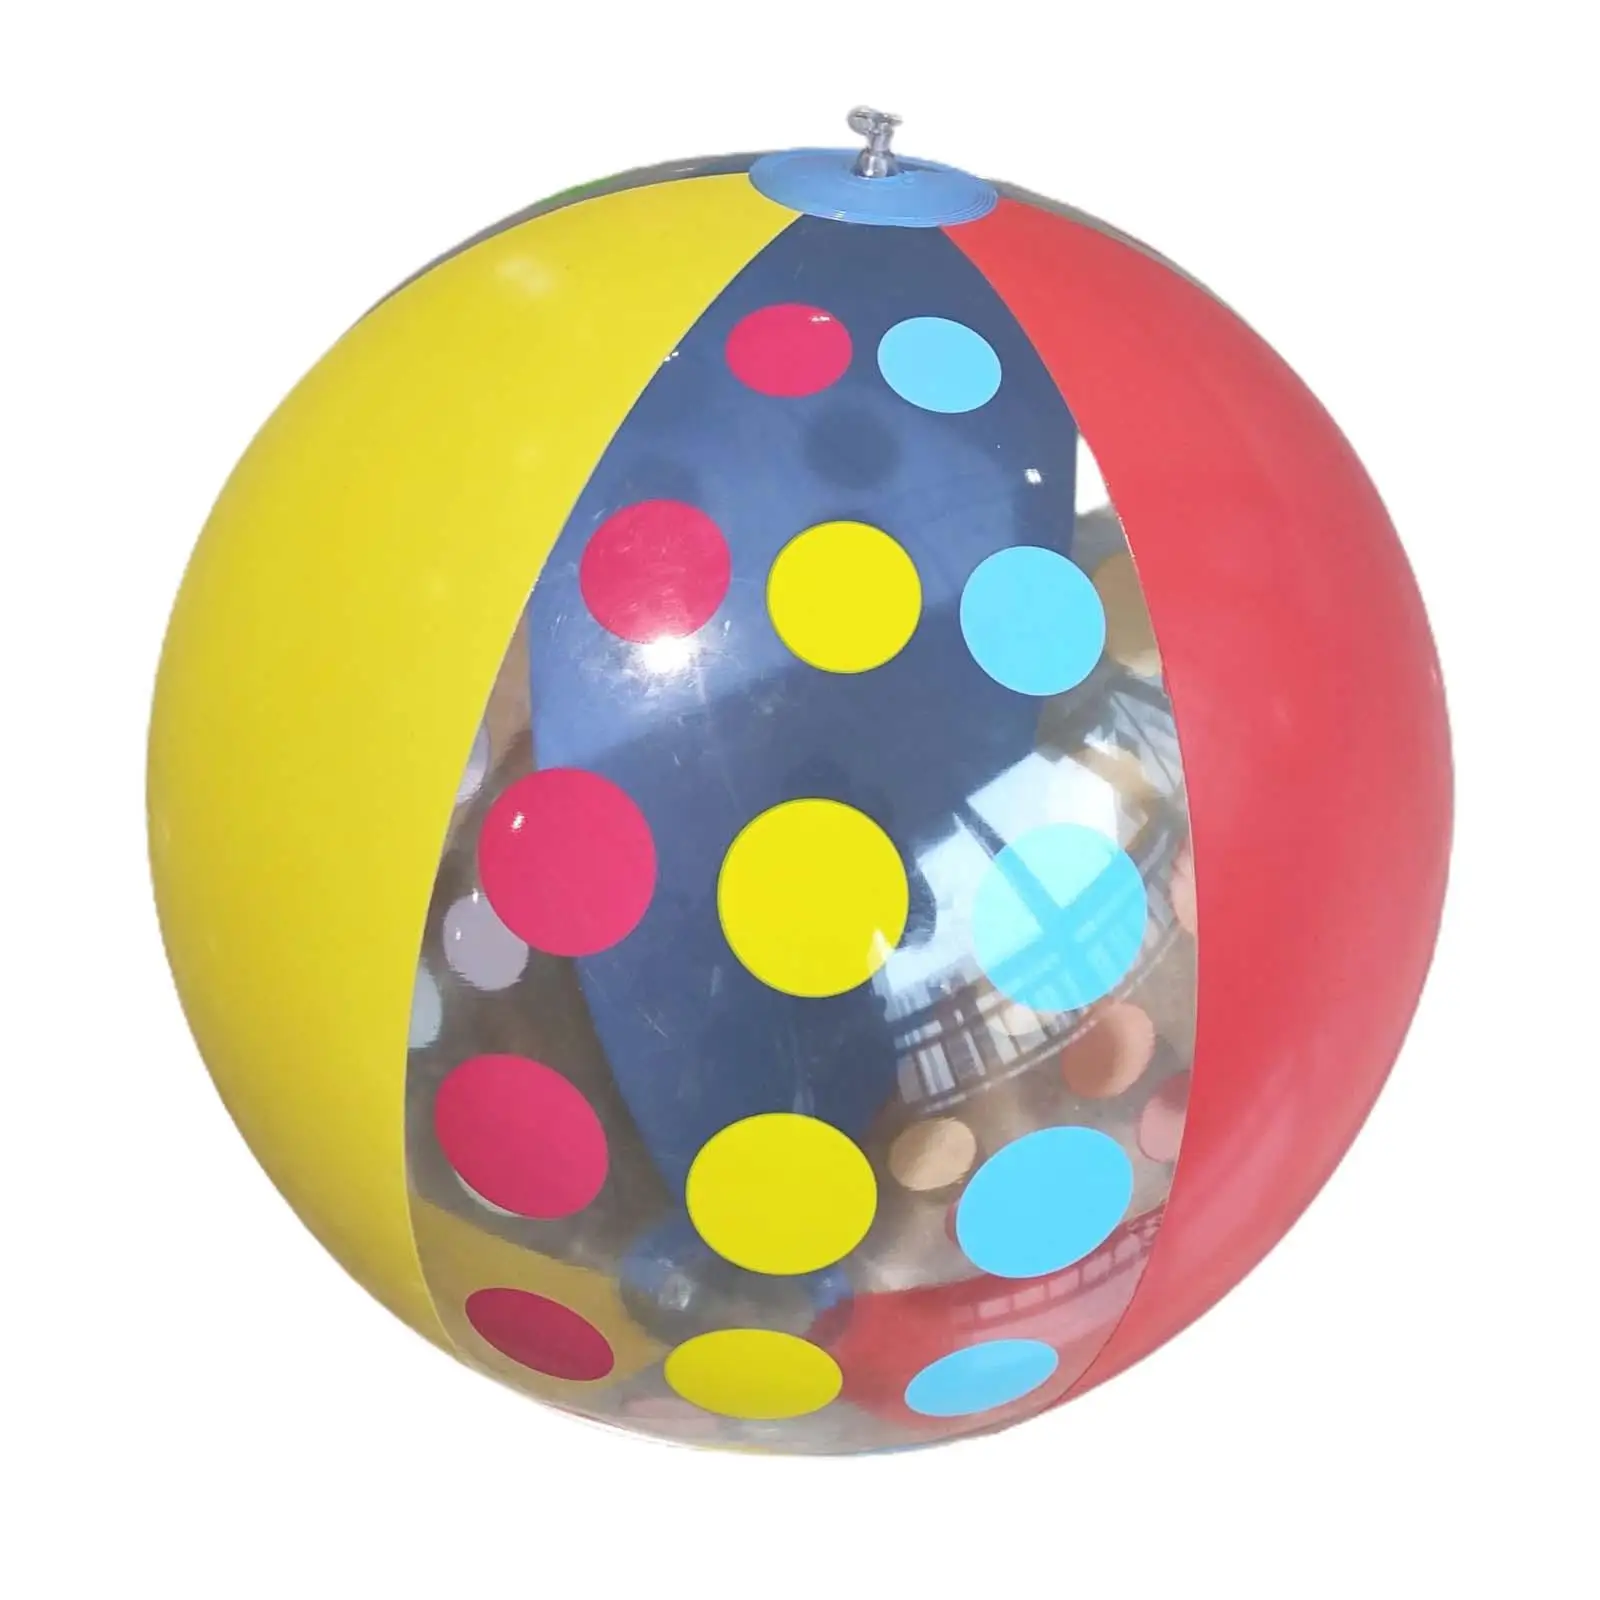 Beach Ball 15.75`` Party Favor Leakproof Pool Water Games Toys Summer Water Games for Hawaiian Theme Party Pool Yard Lake